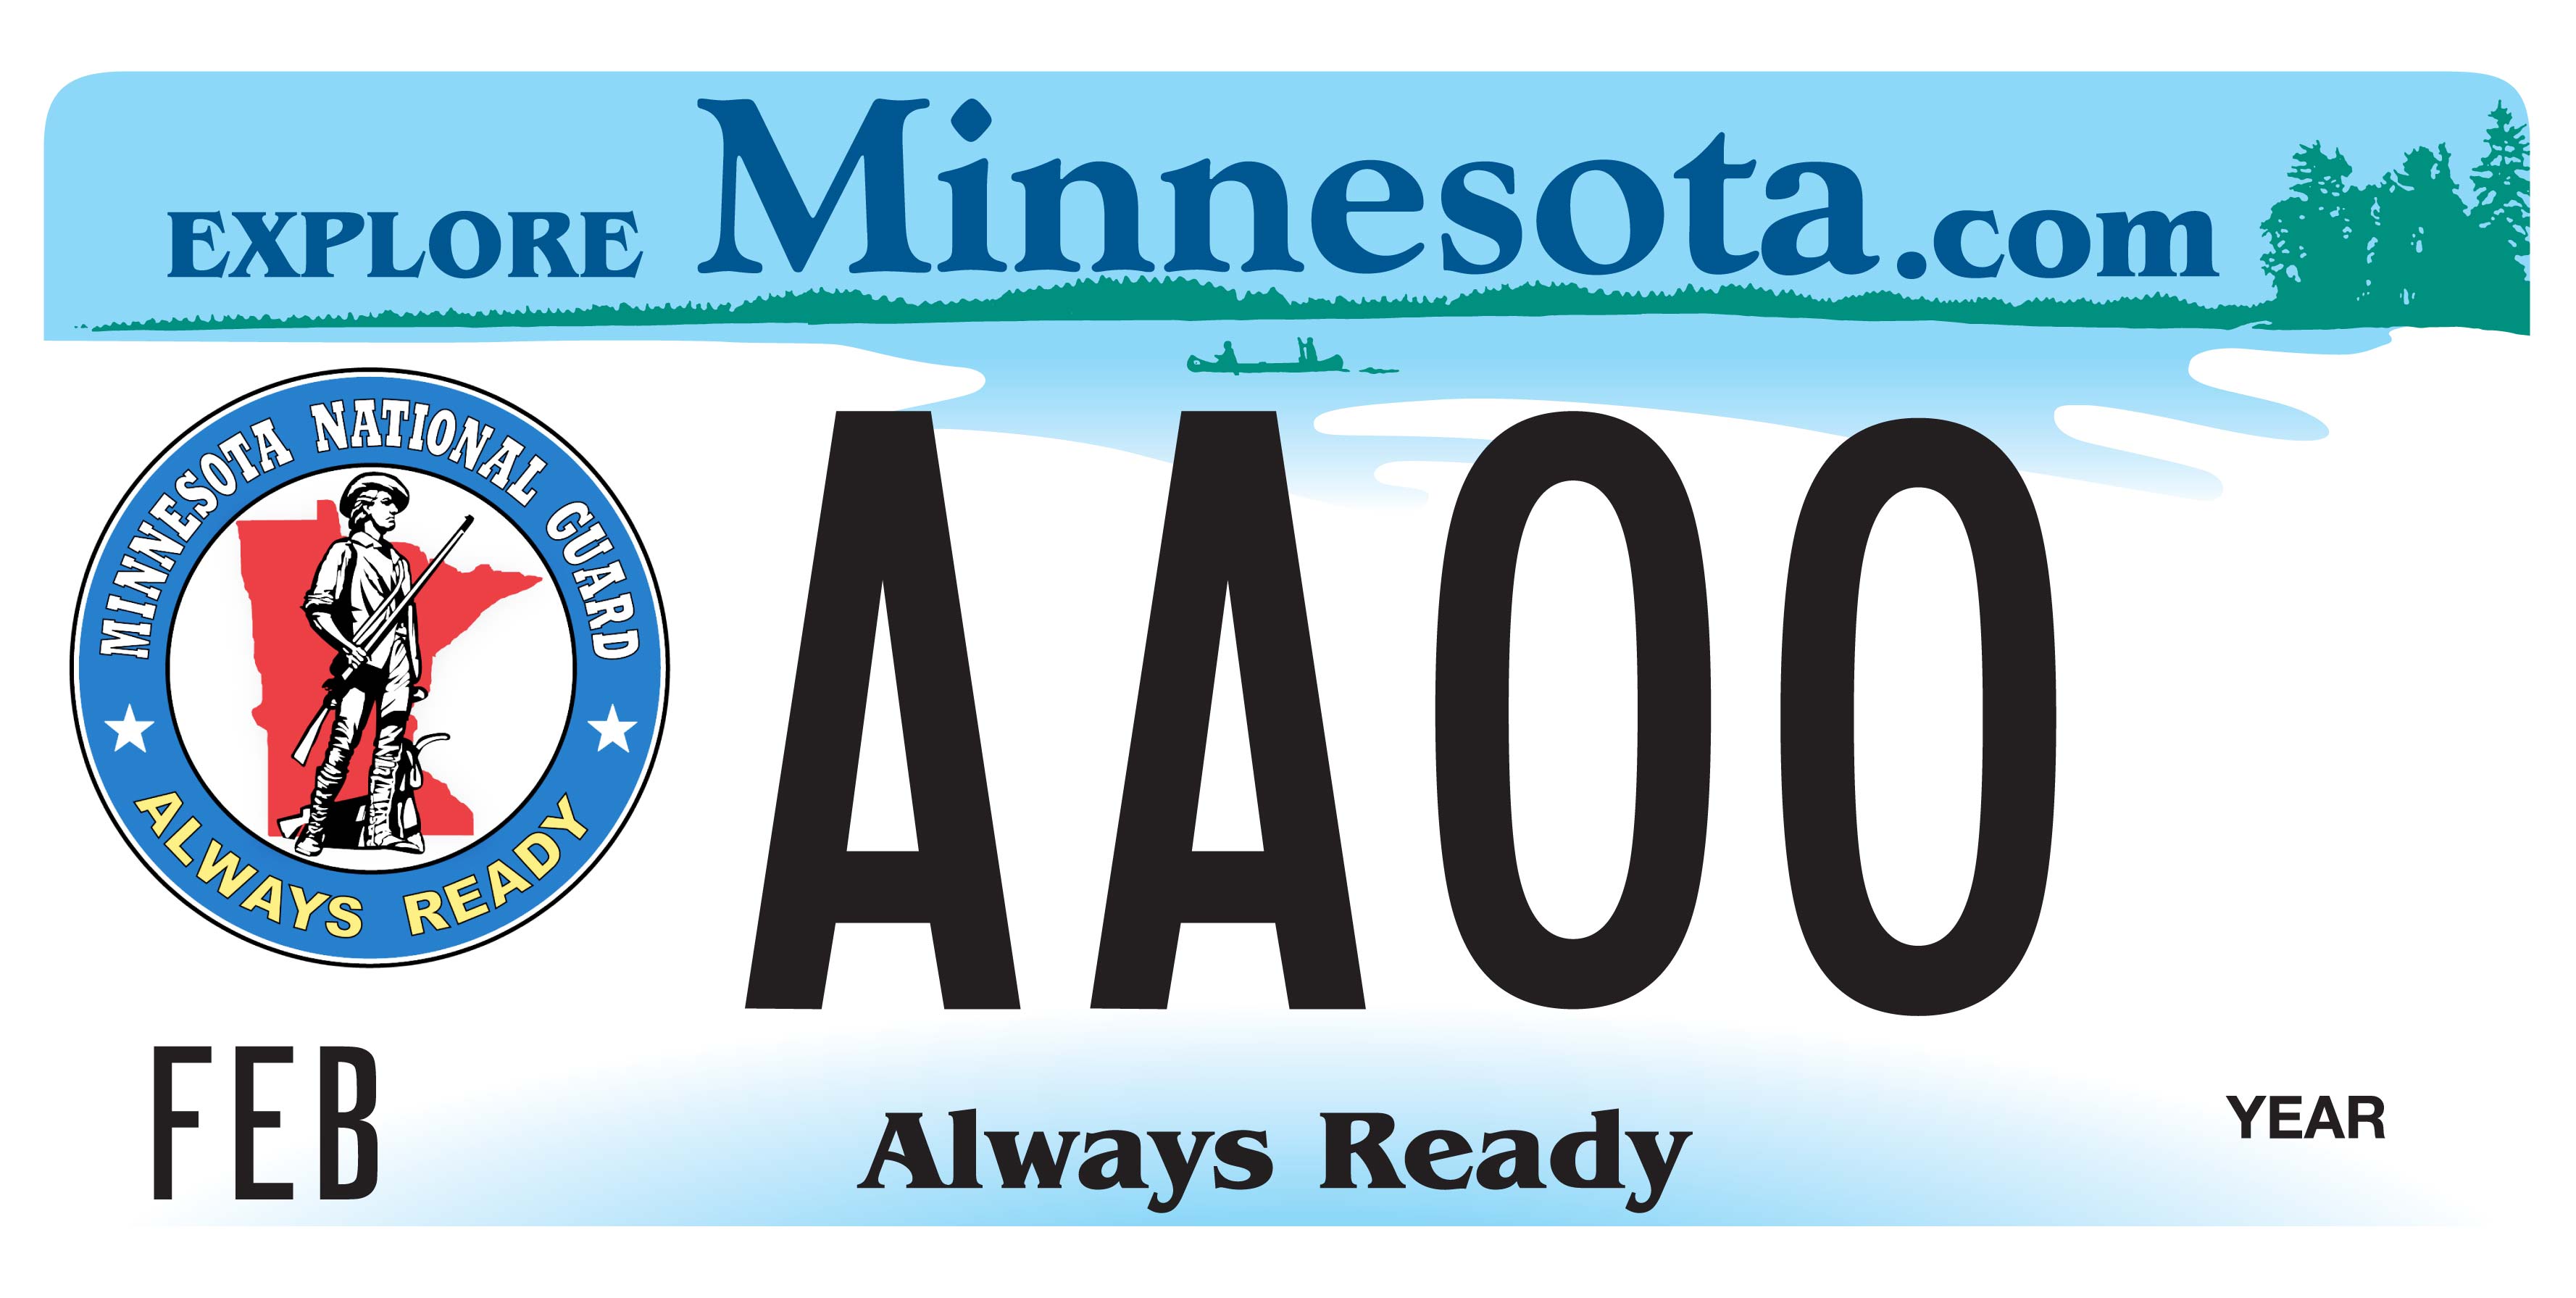 Minnesota National Guard License Plate Image (Two)